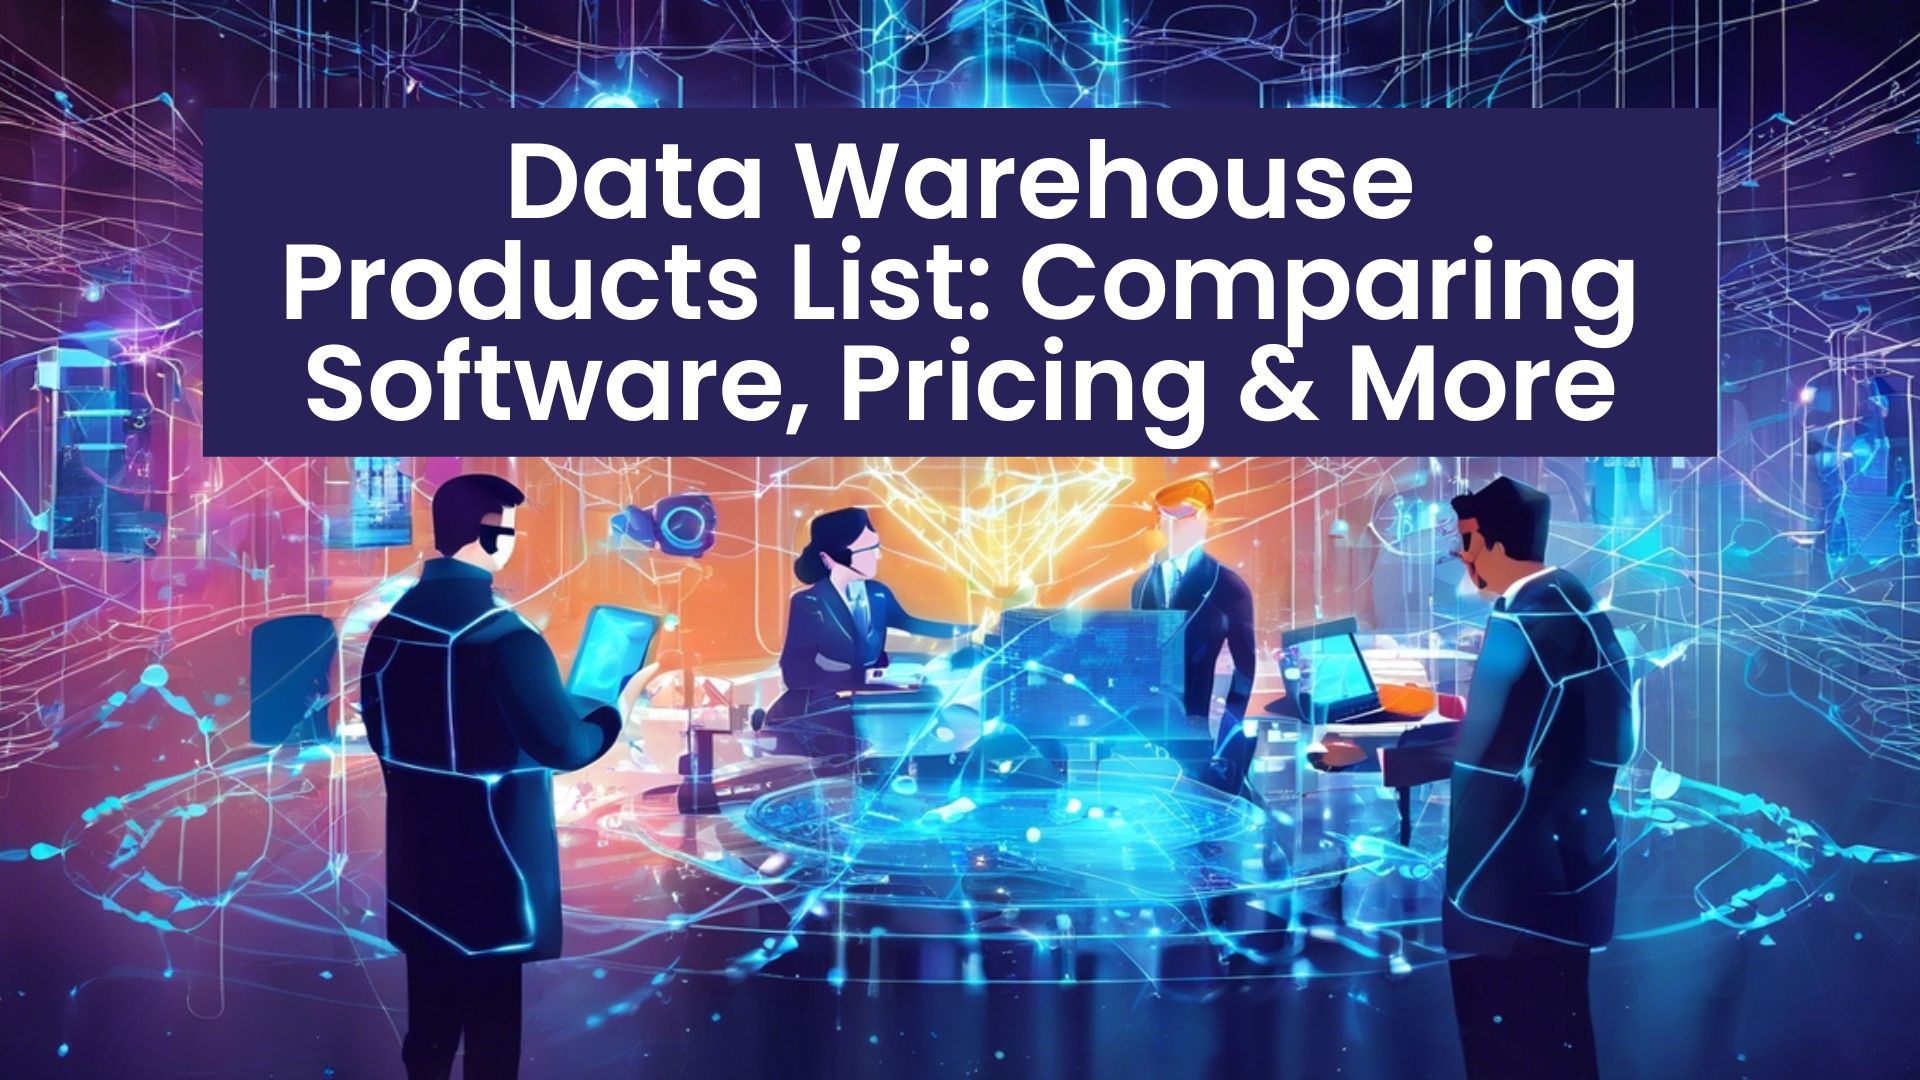 Data Warehouse Products List Comparing Software, Pricing & More